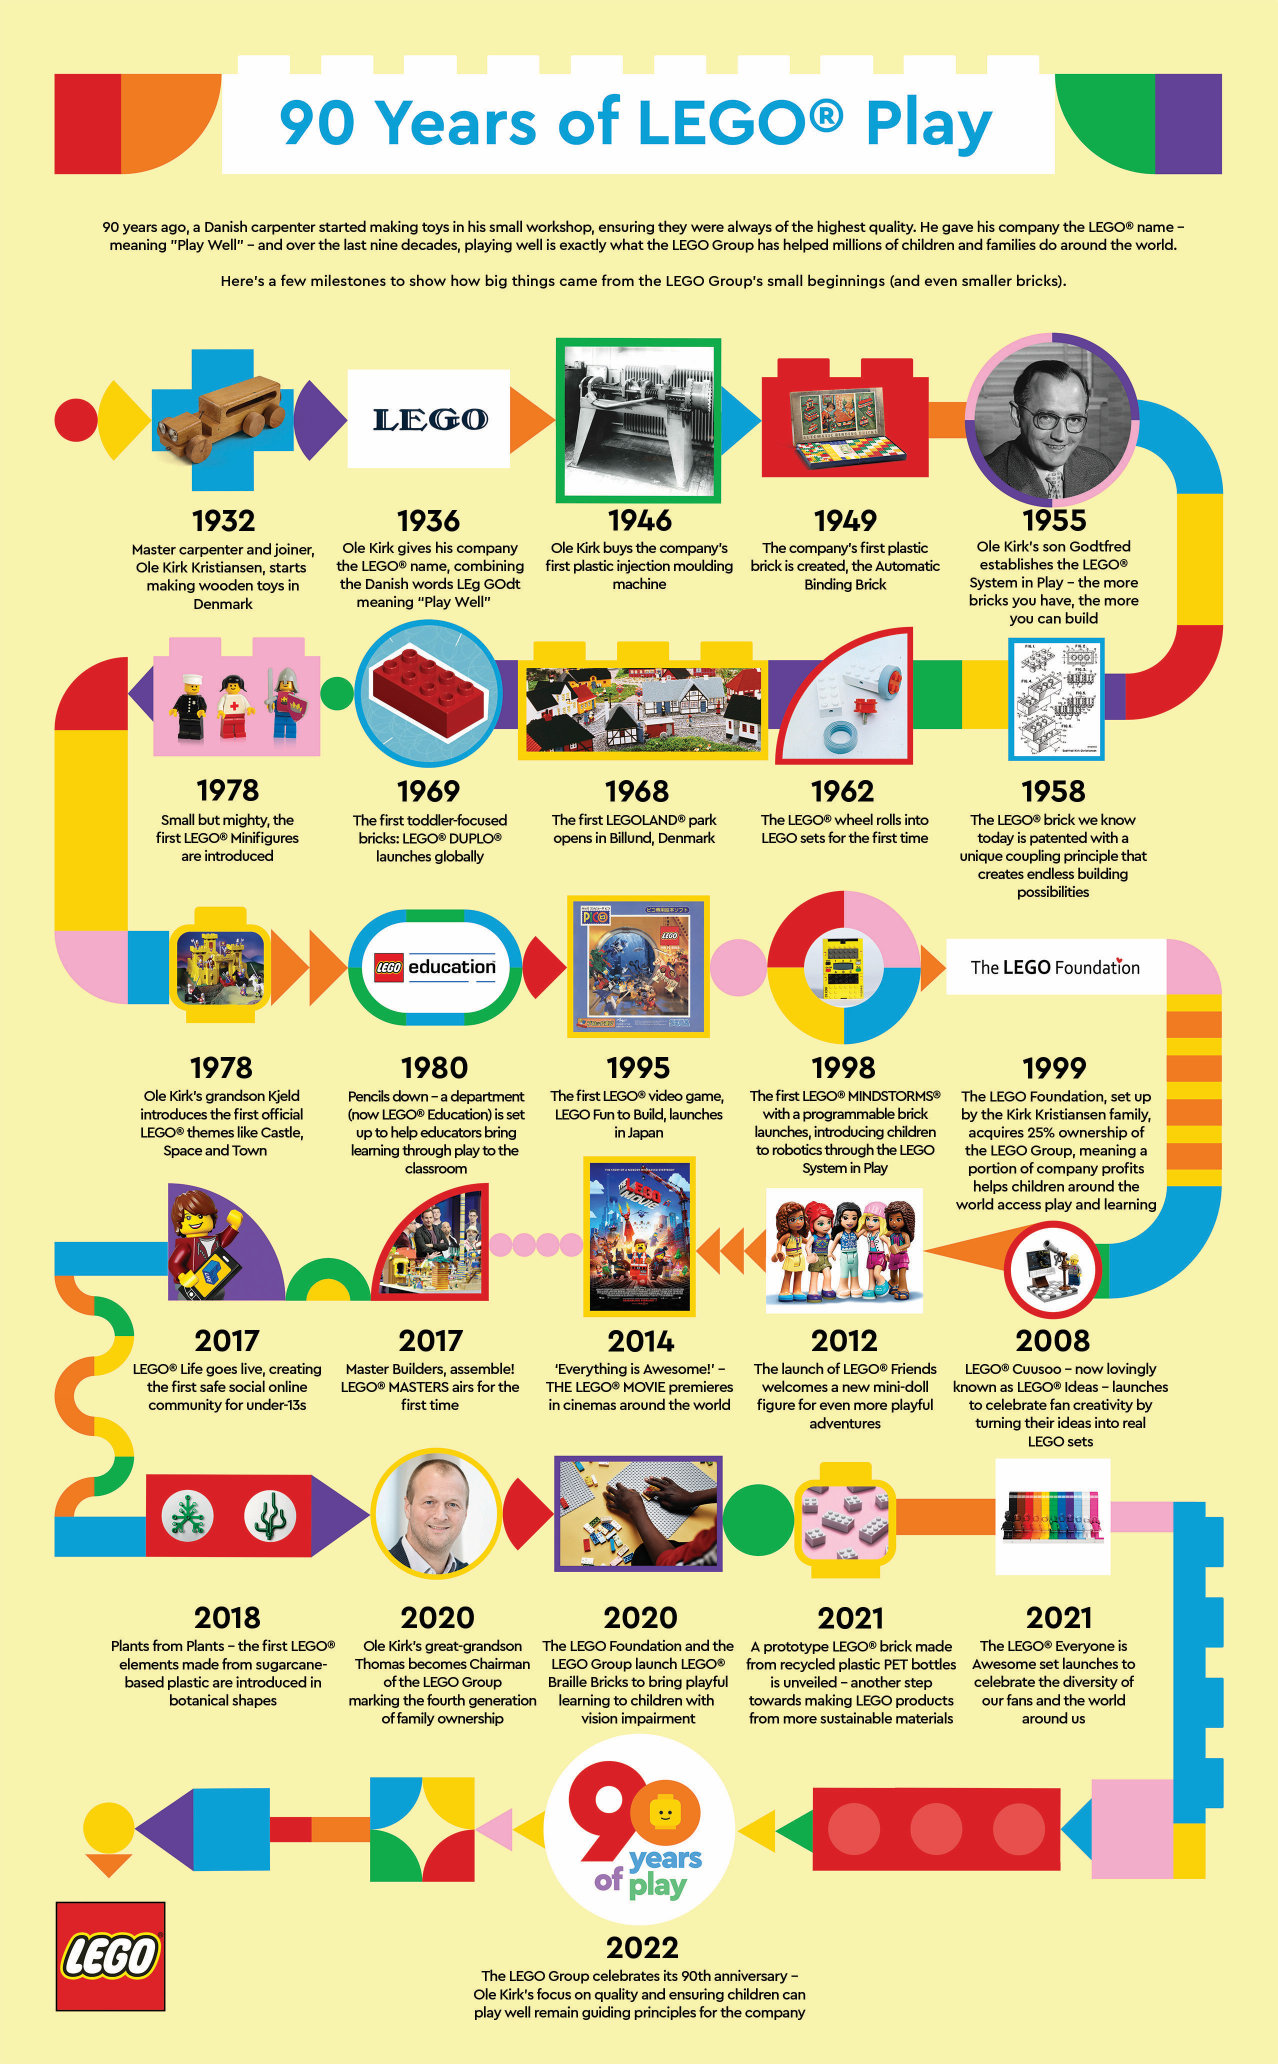 LEGO to celebrate 90 years of play